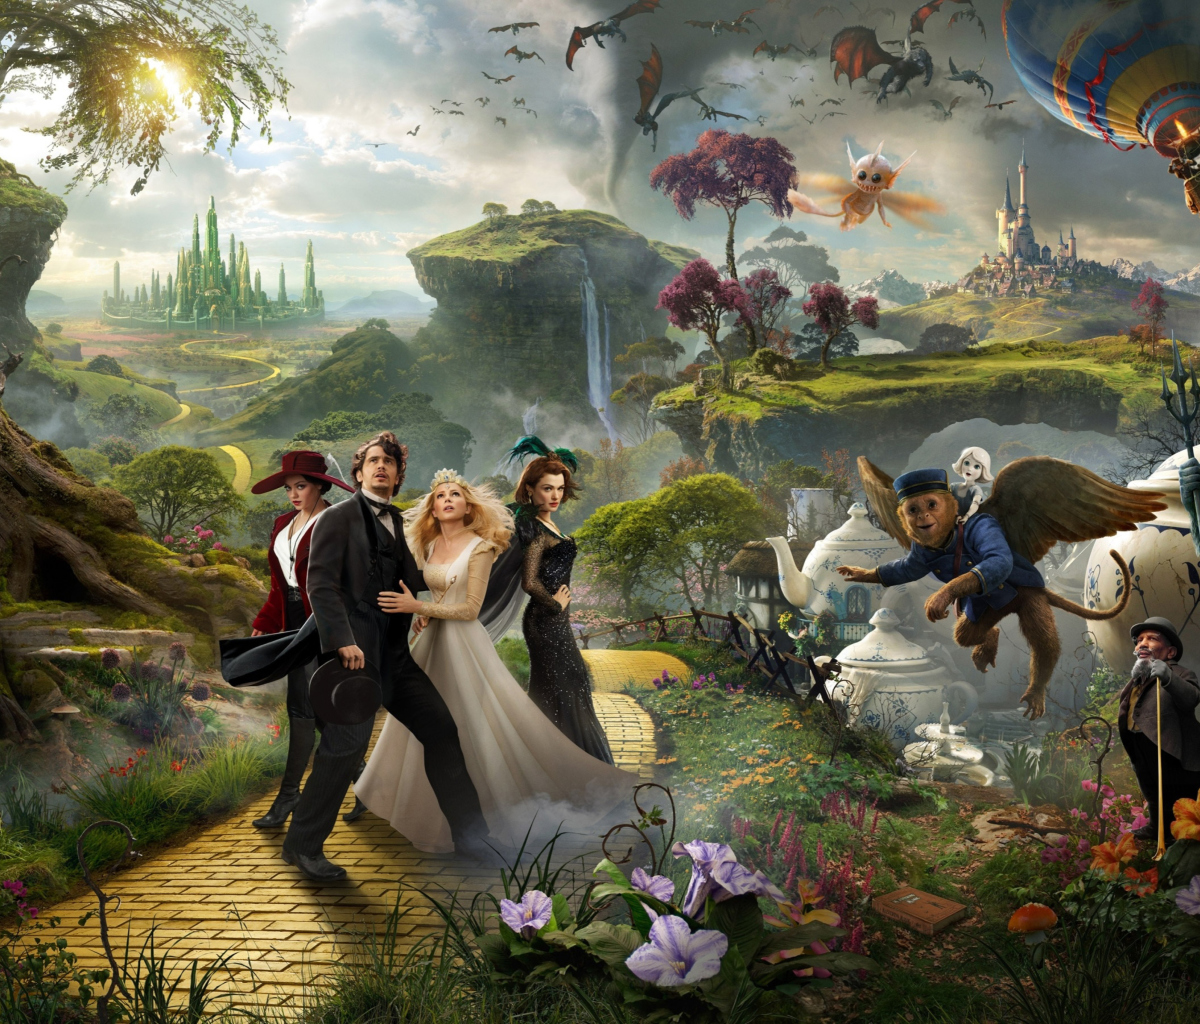 Oz The Great And Powerful 2013 Movie wallpaper 1200x1024